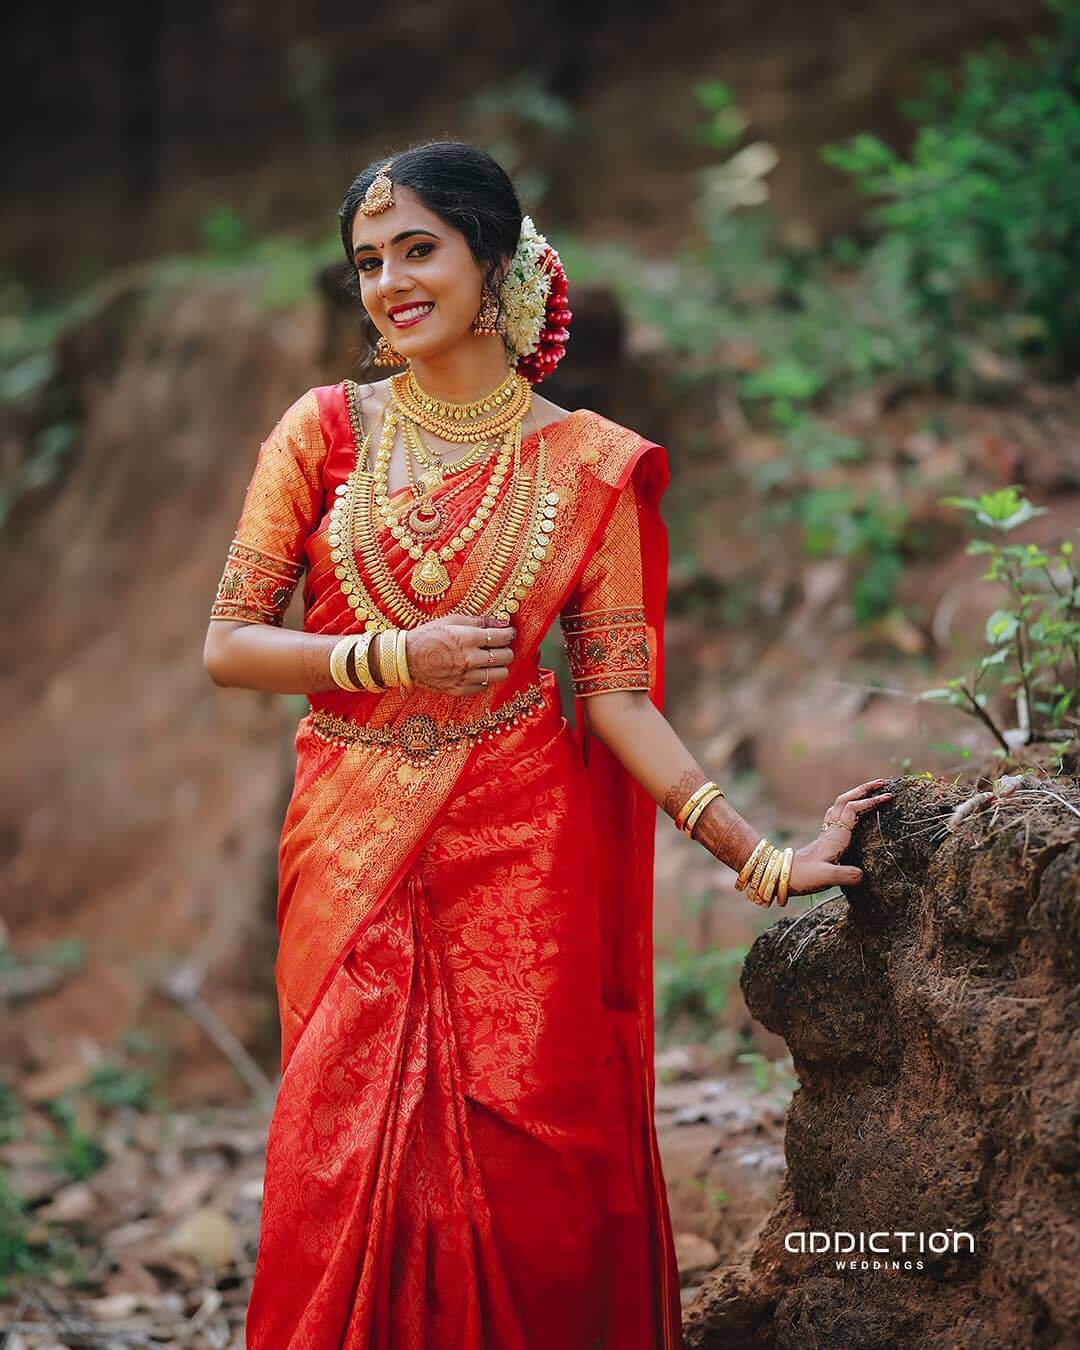 The red magic on the South Indian wedding saree